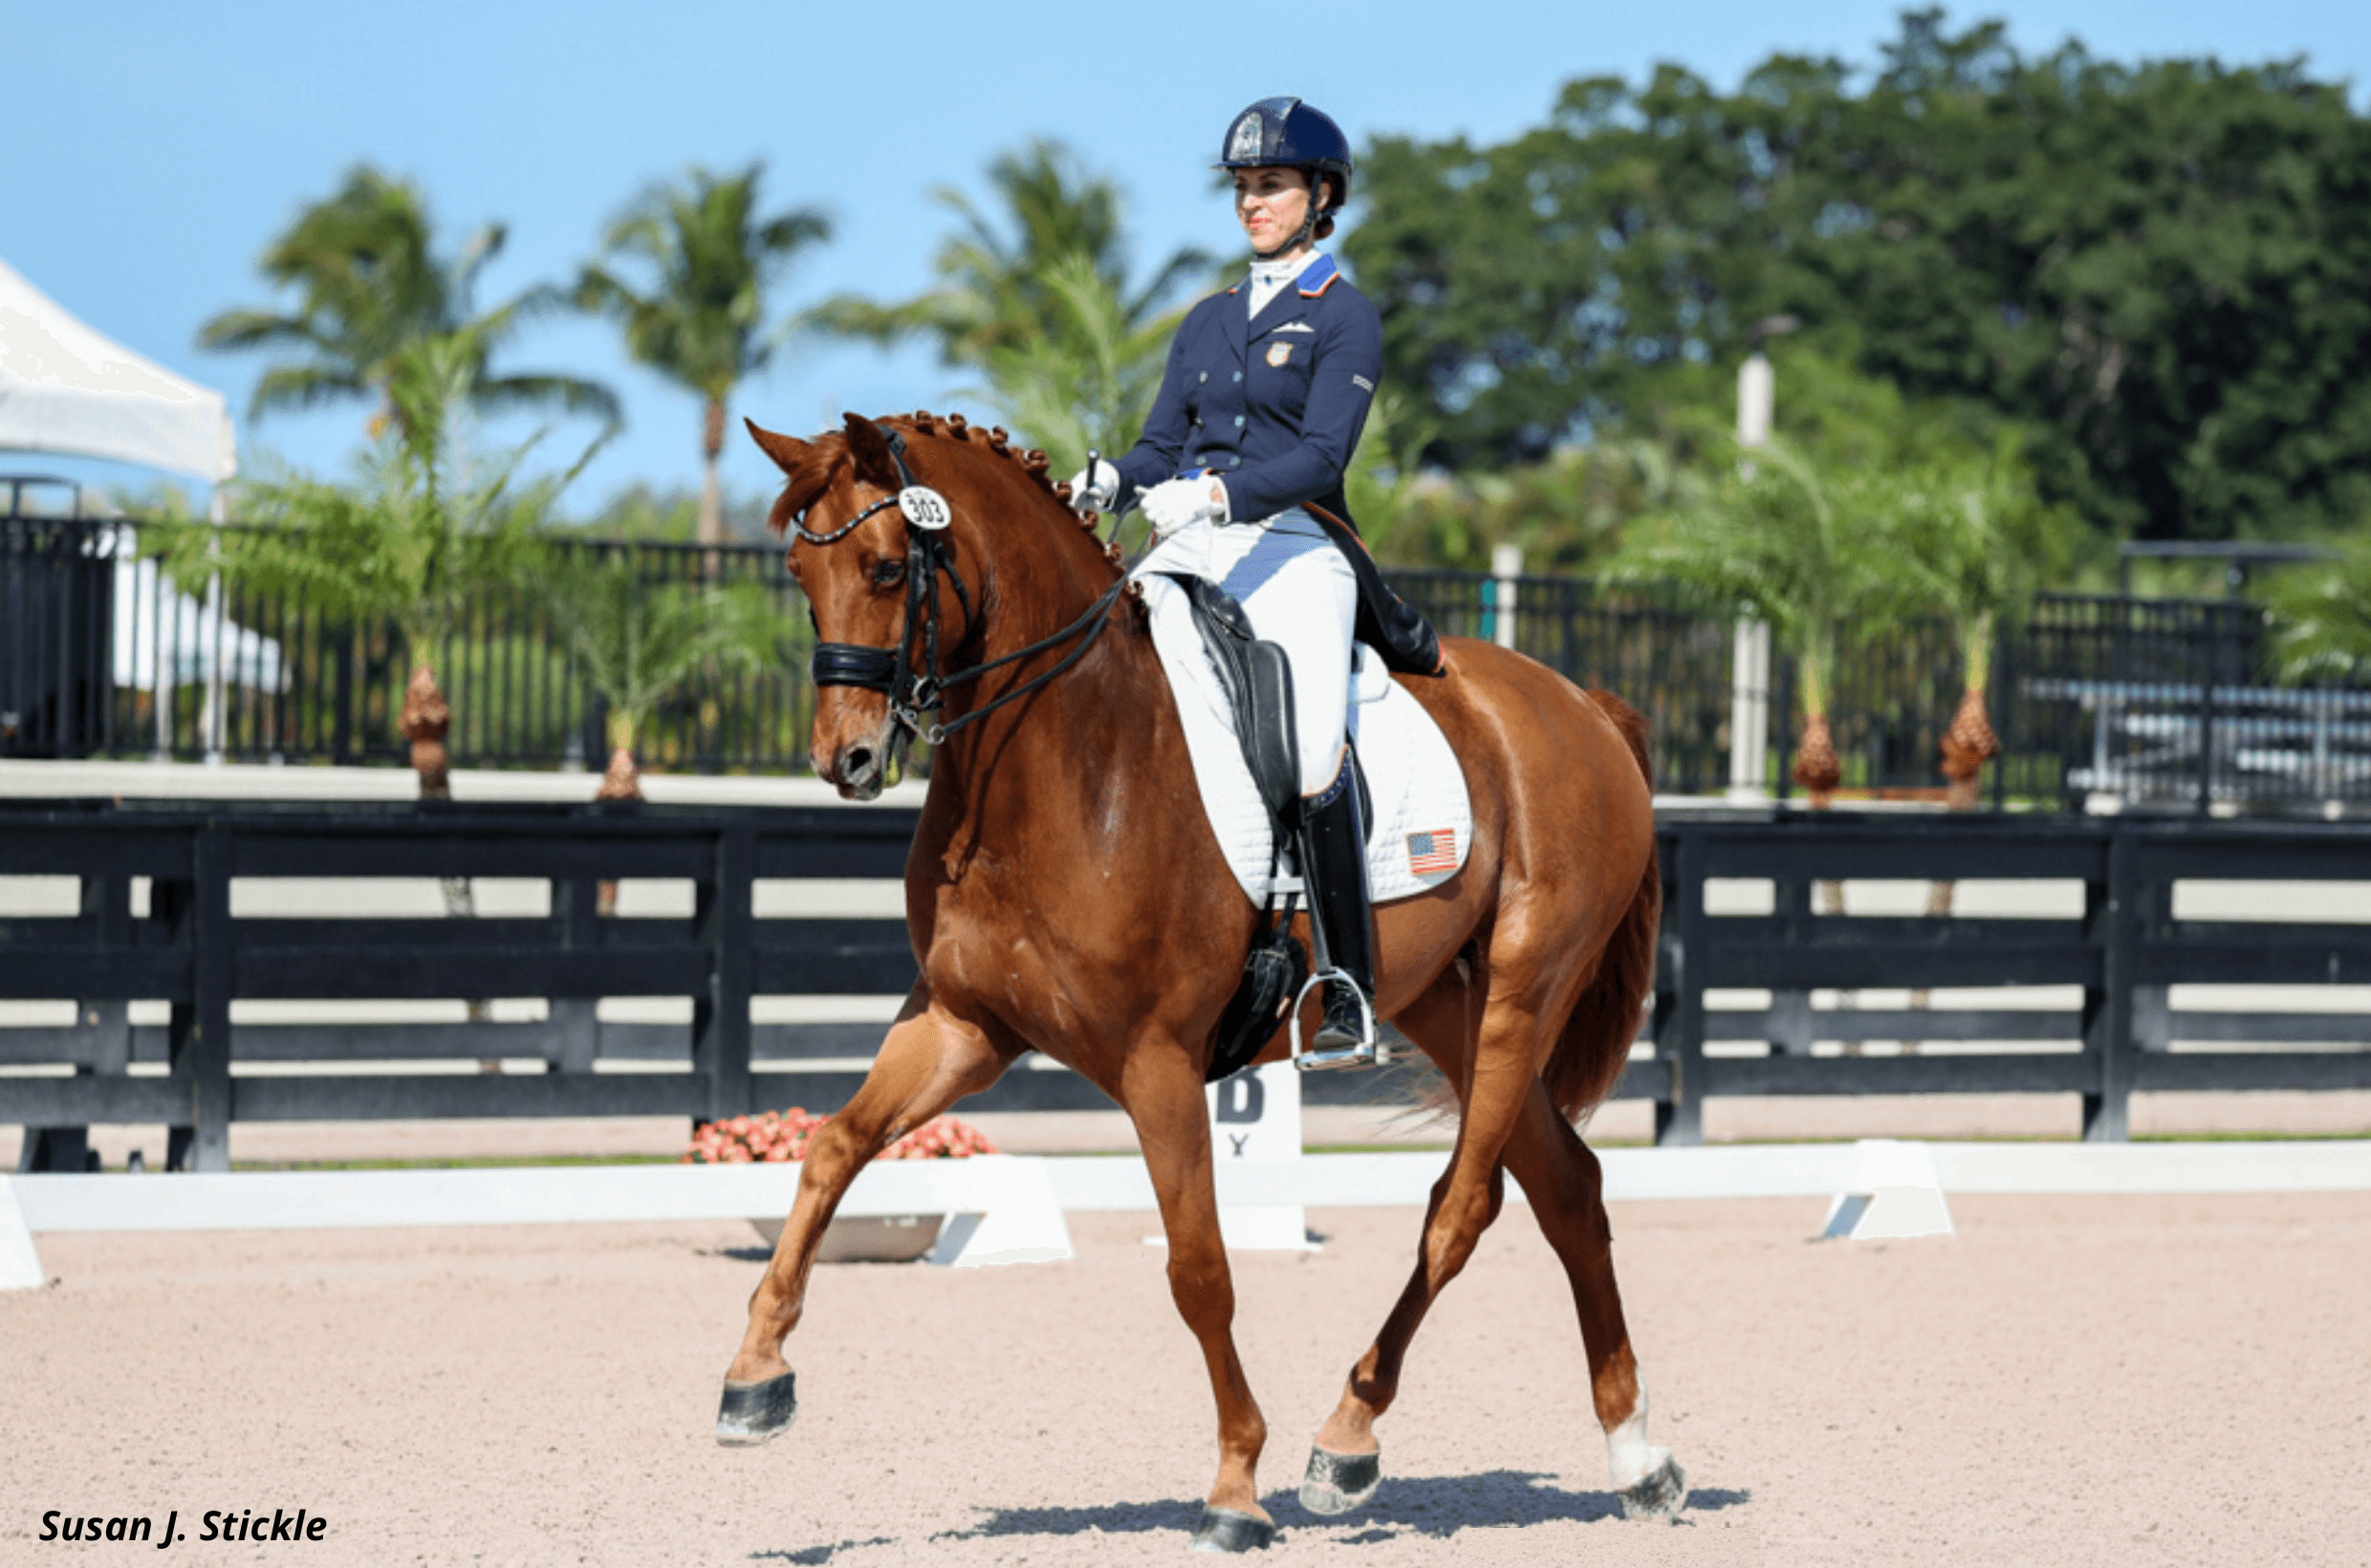 What are Your Dressage Dreams?